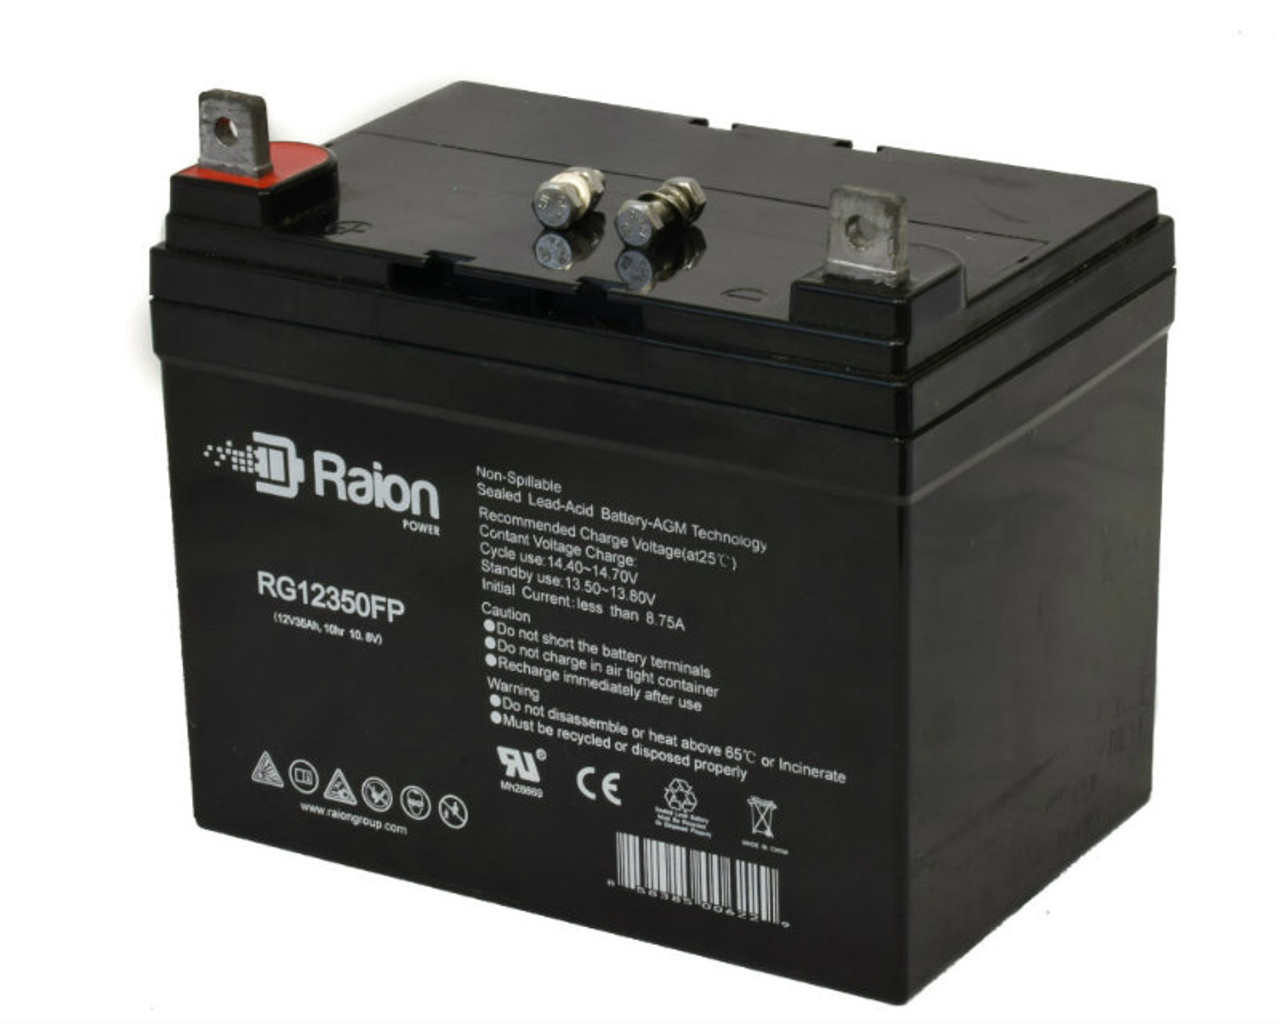 Raion Power Replacement 12V 35Ah RG12350FP Battery for Clipper 2500F